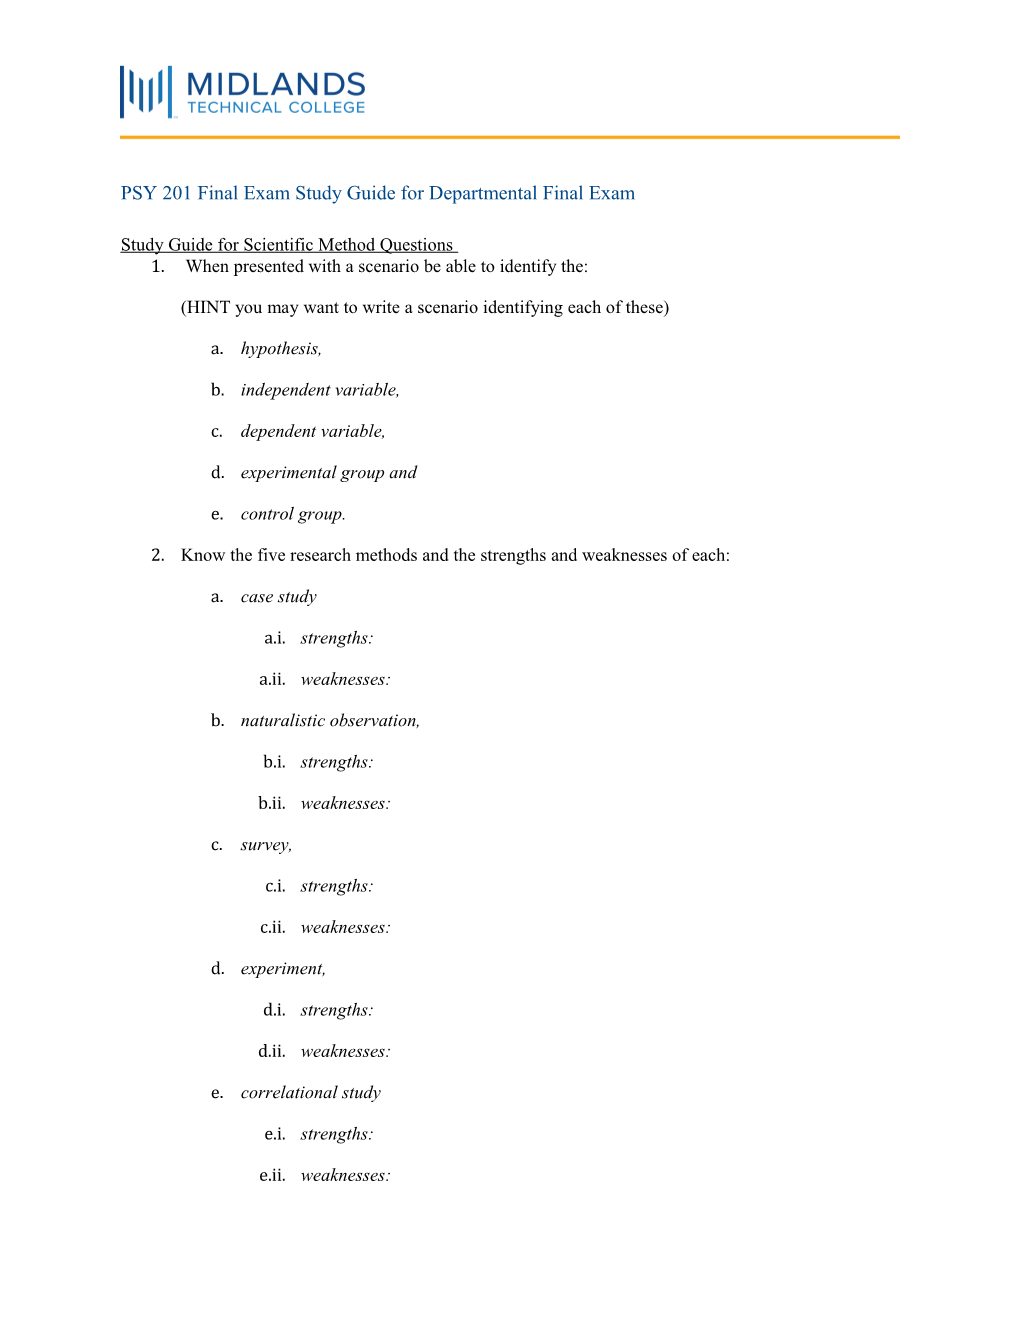 PSY 201 Final Exam Study Guide for Departmental Final Exam